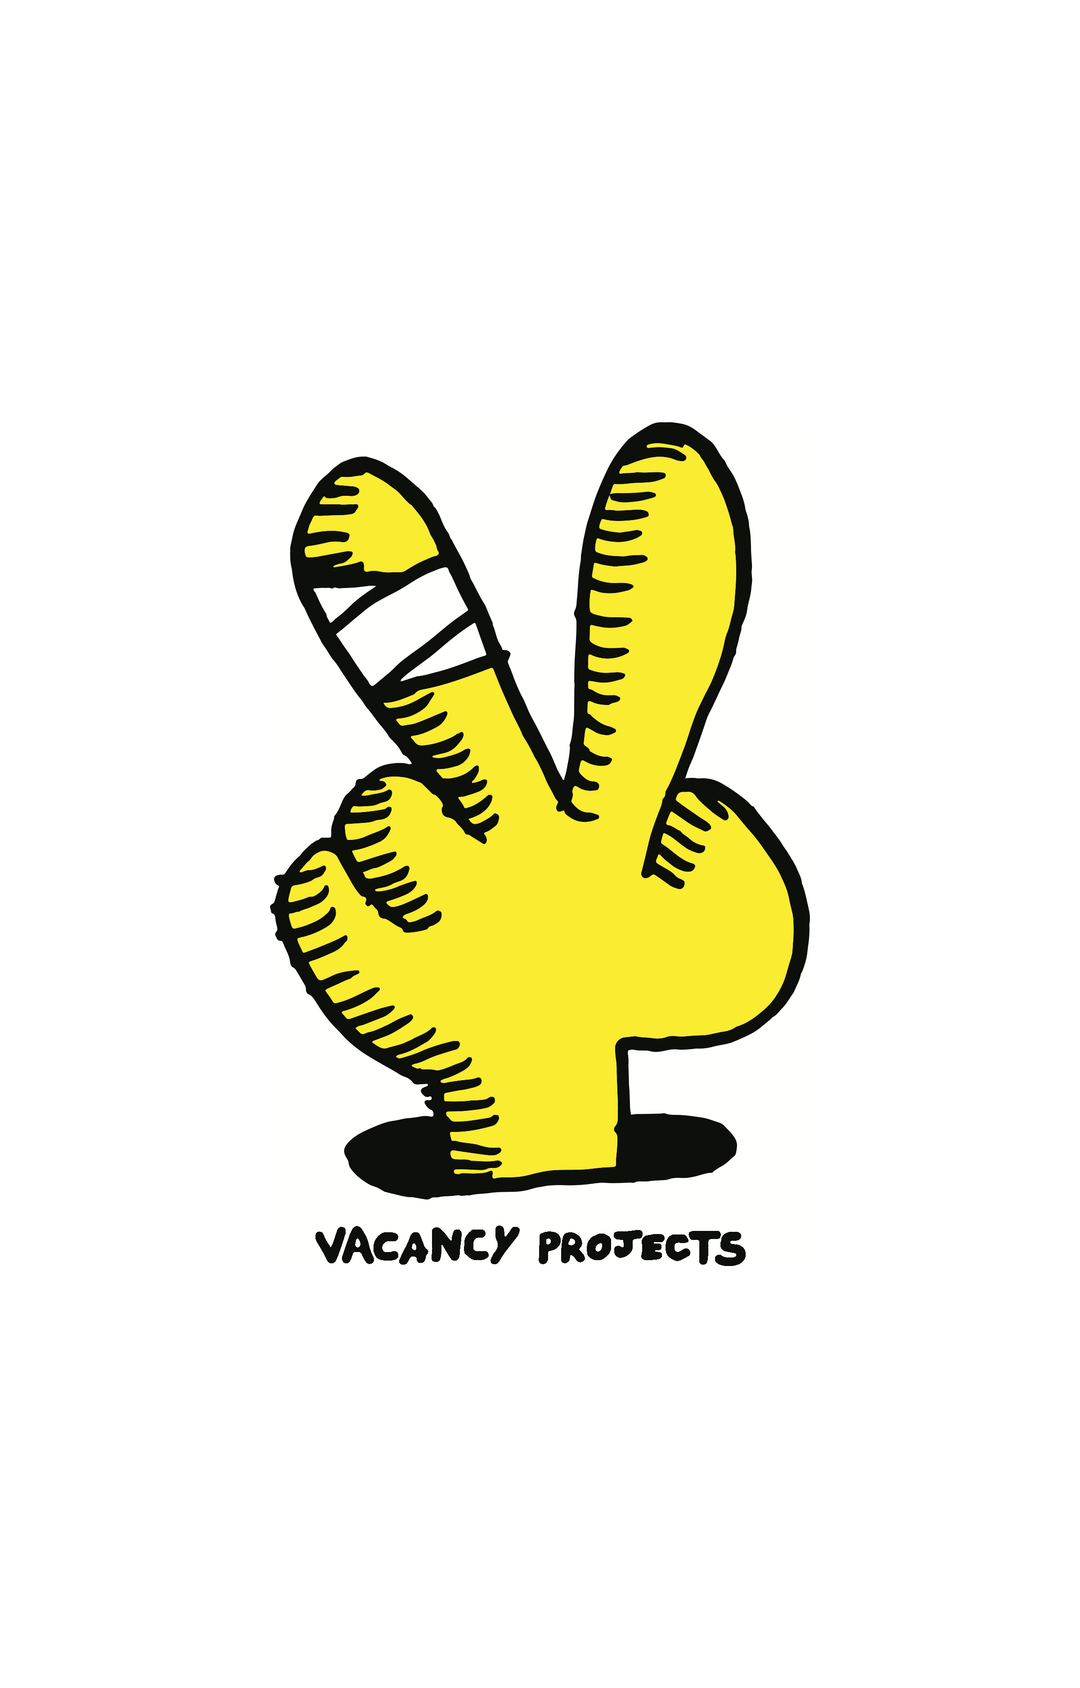 Vacancy Projects